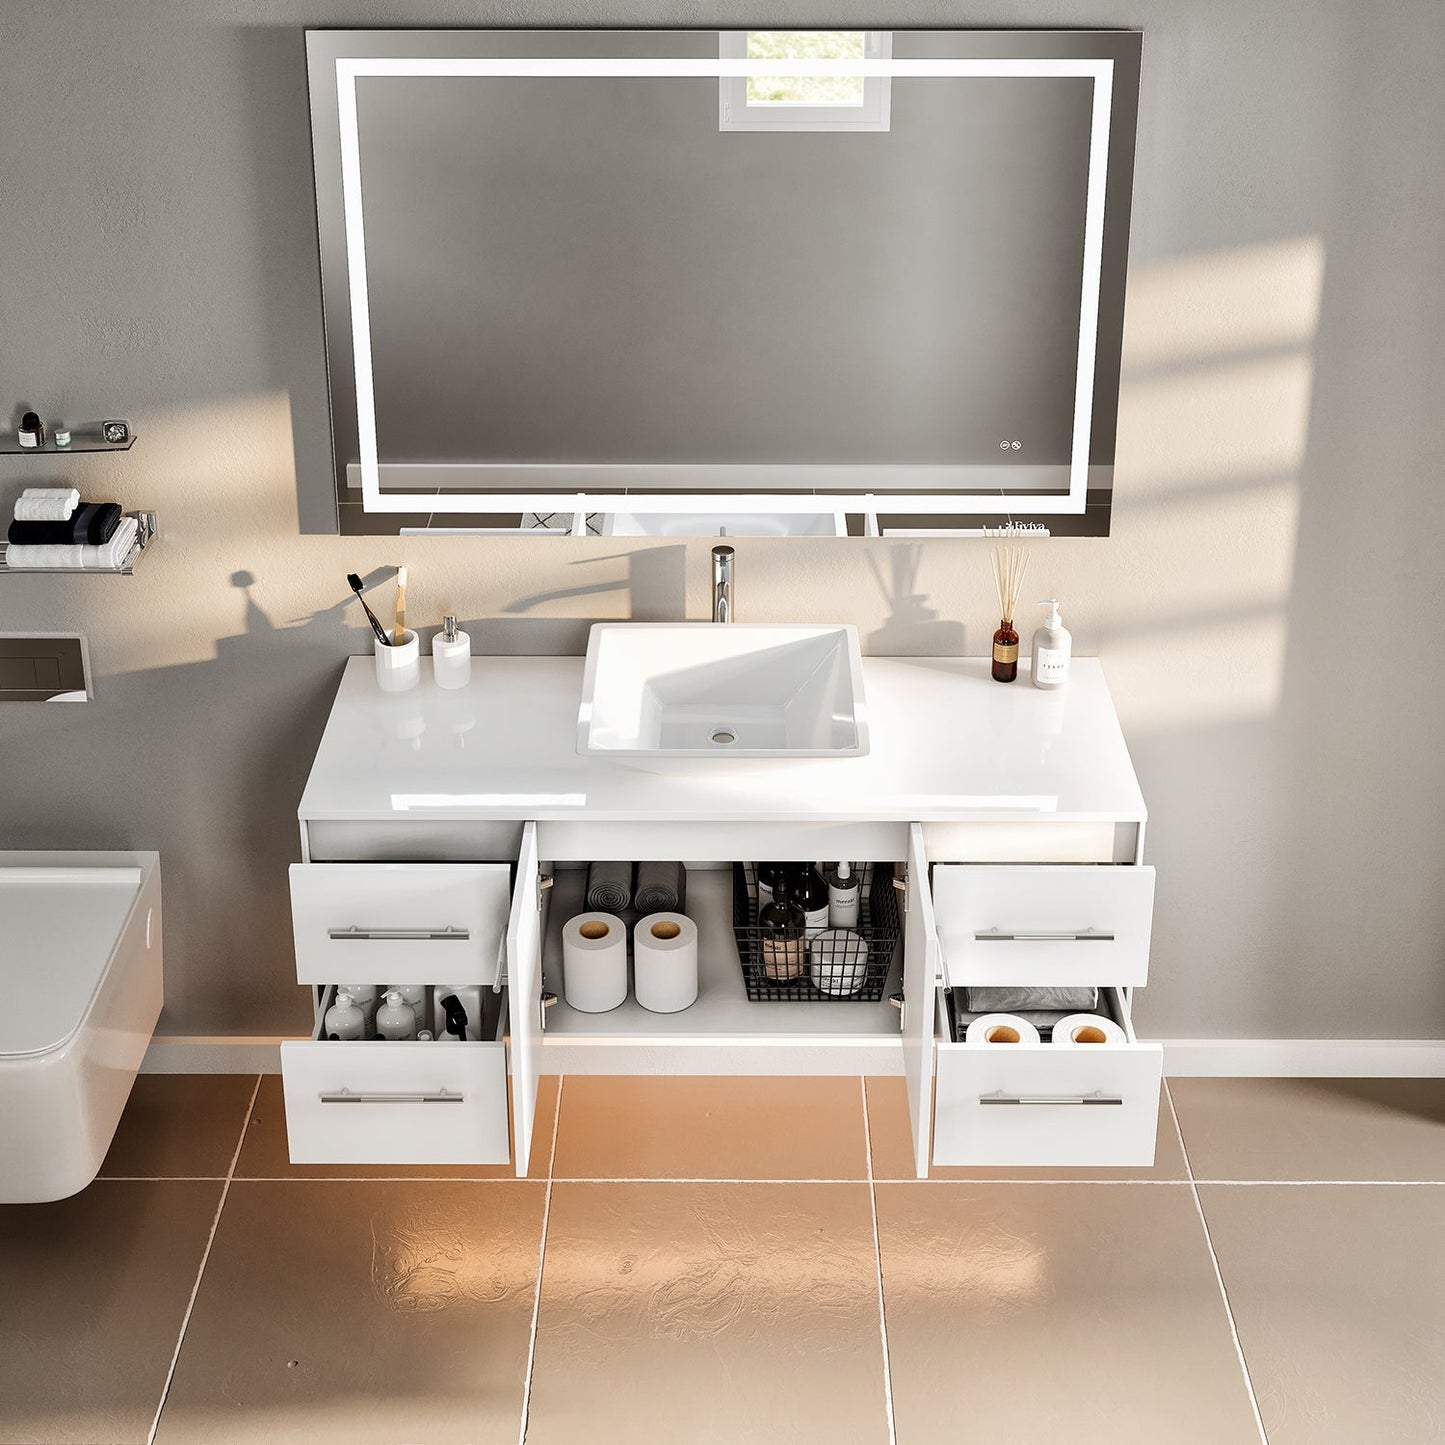 Wave 48"W x 22"D White Bathroom Vanity with White Quartz Countertop and Vessel Porcelain Sink